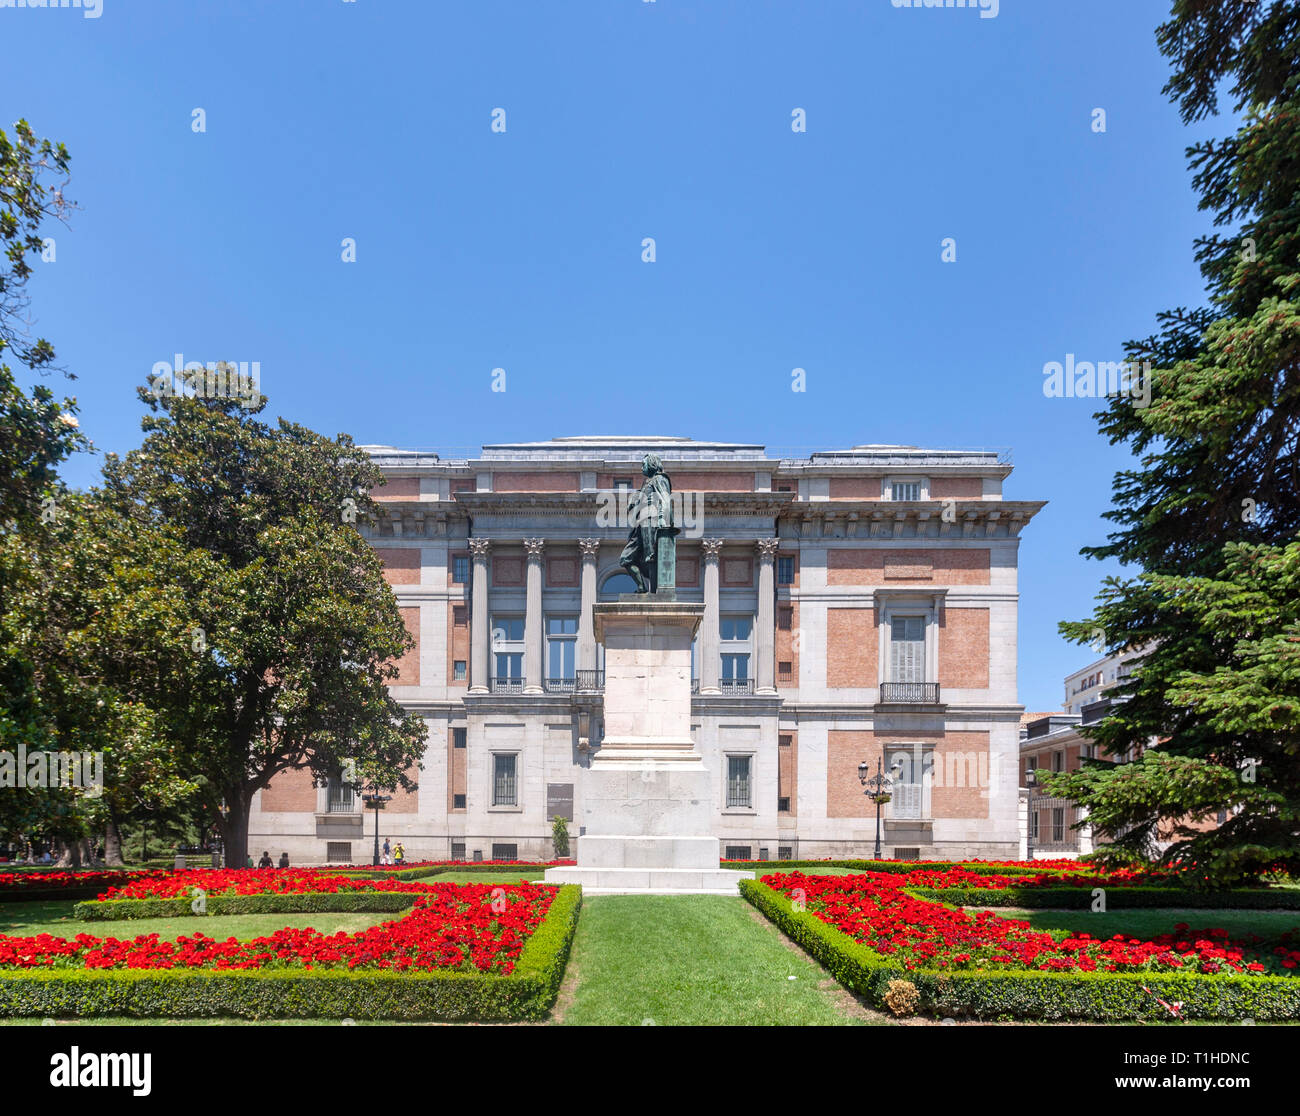 Plaza Murillo and Prado Museum from the entrance of Real Jardín Botánico, Royal Botanical Garden of Madrid, Madrid, Spain Stock Photo